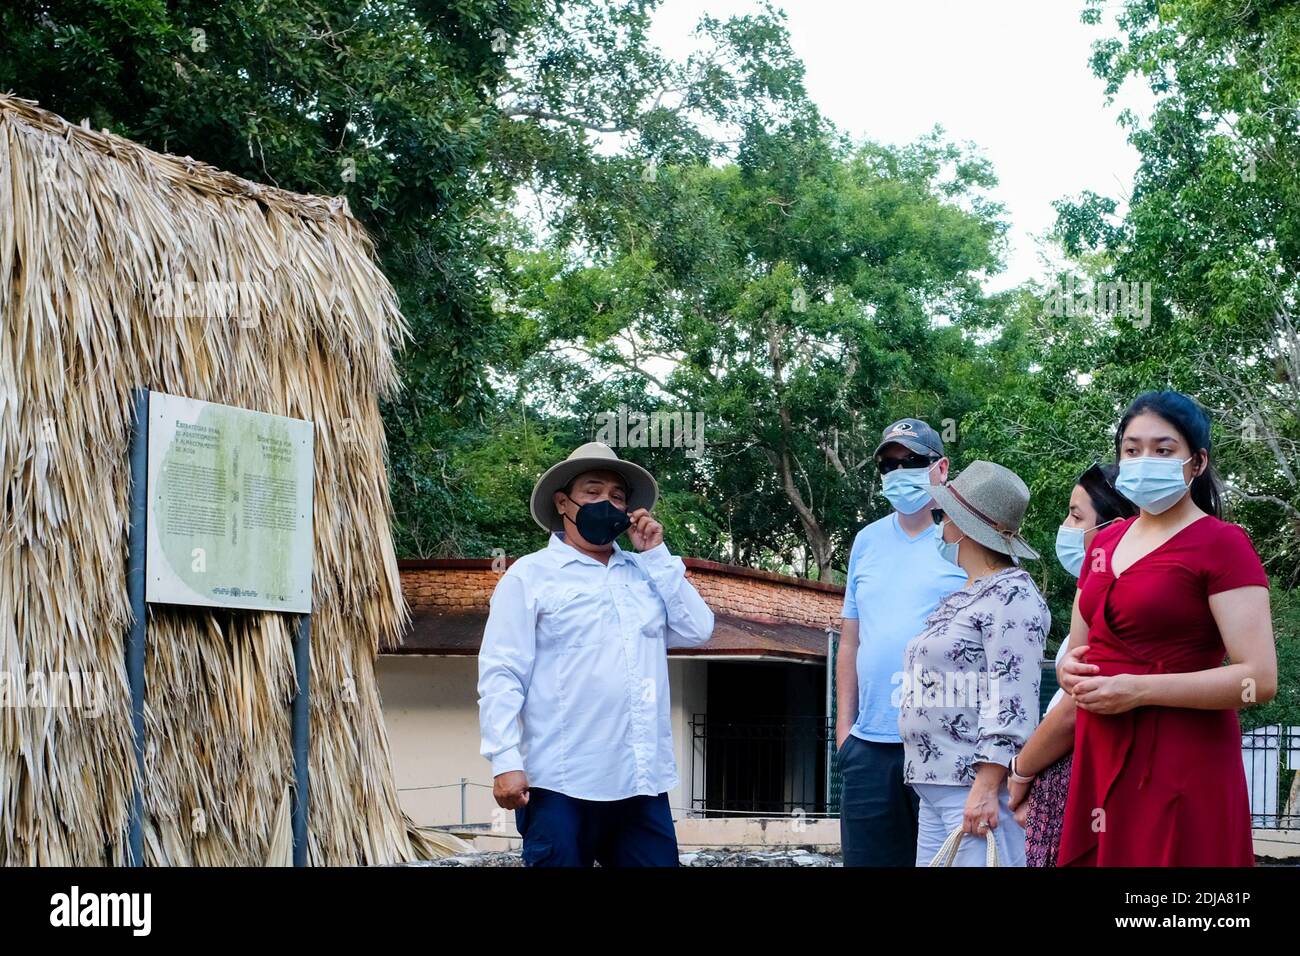 Tourists taking guided tour at the Mayan touristic site of Uxmal in Yucatan Mexico during the Covid-19 Pandemic Stock Photo